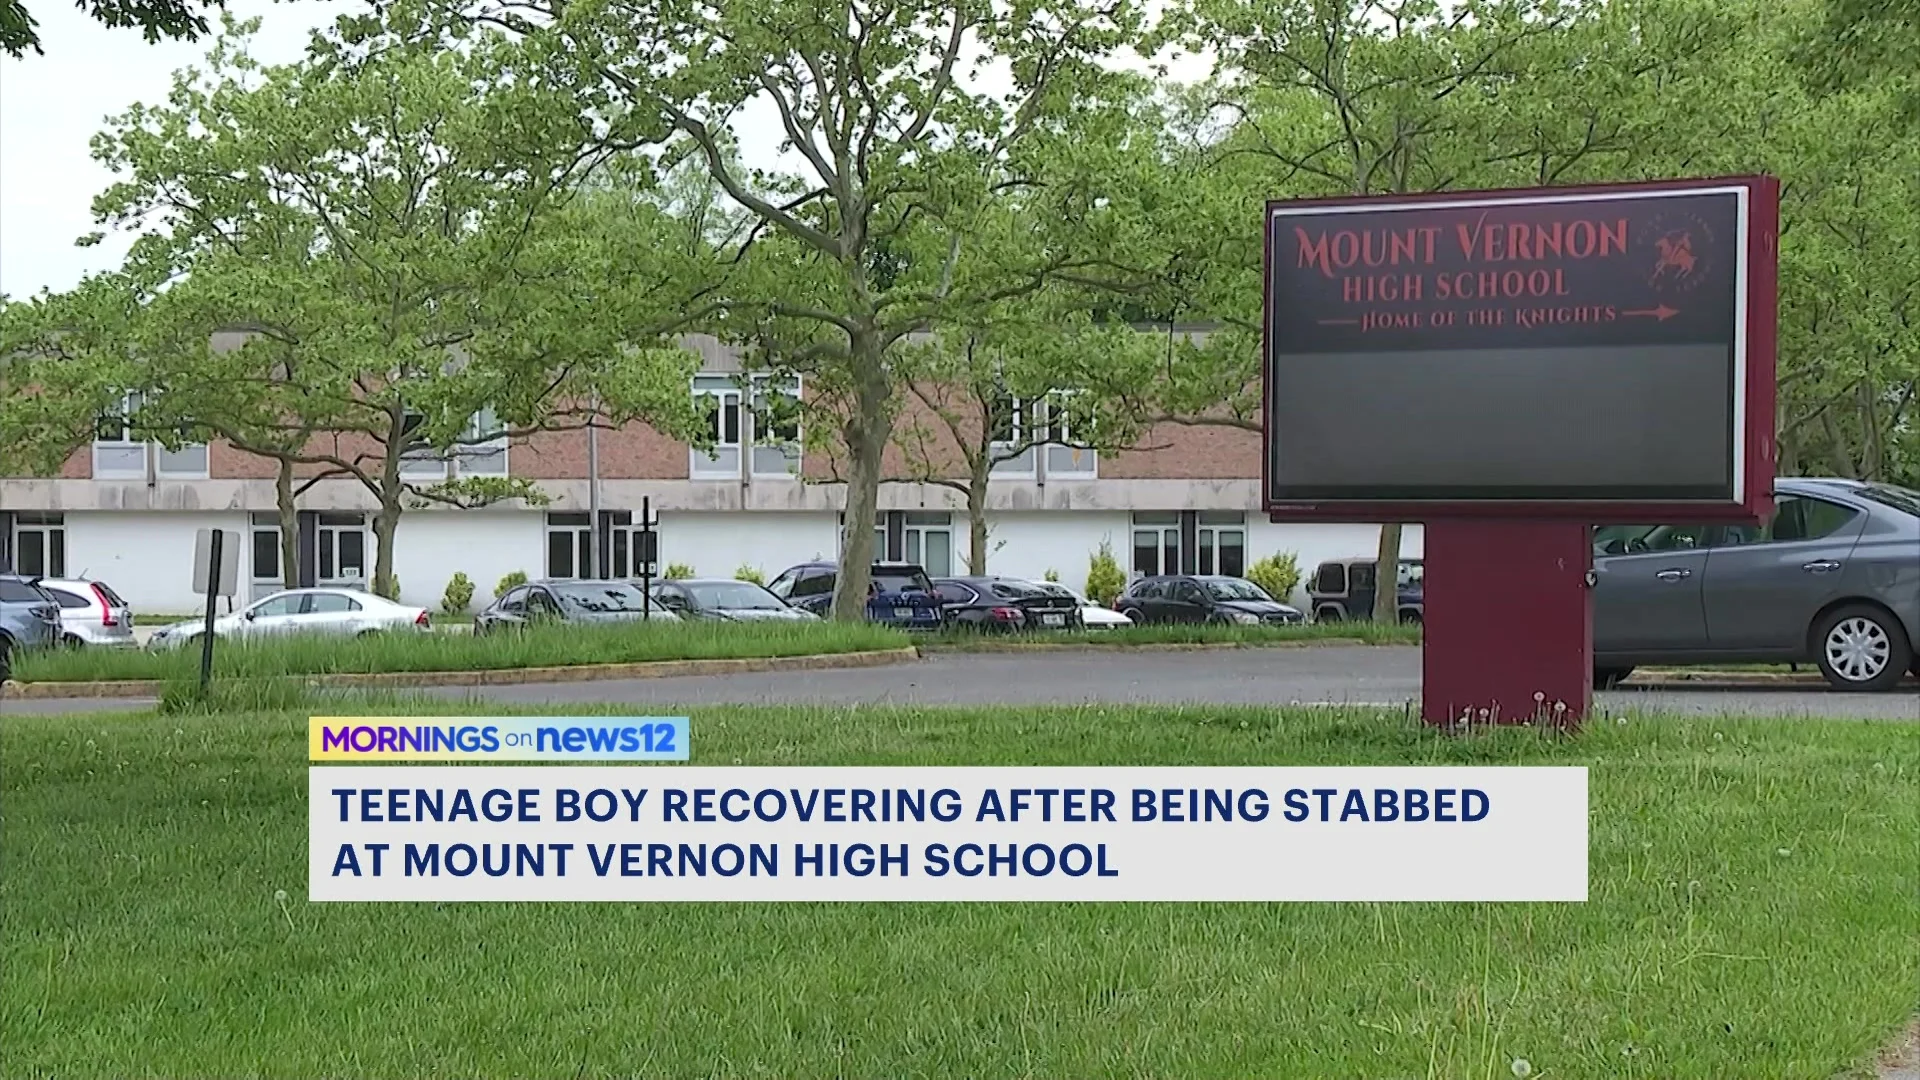 16-year-old charged with 2nd-degree assault in stabbing at Mount Vernon HS